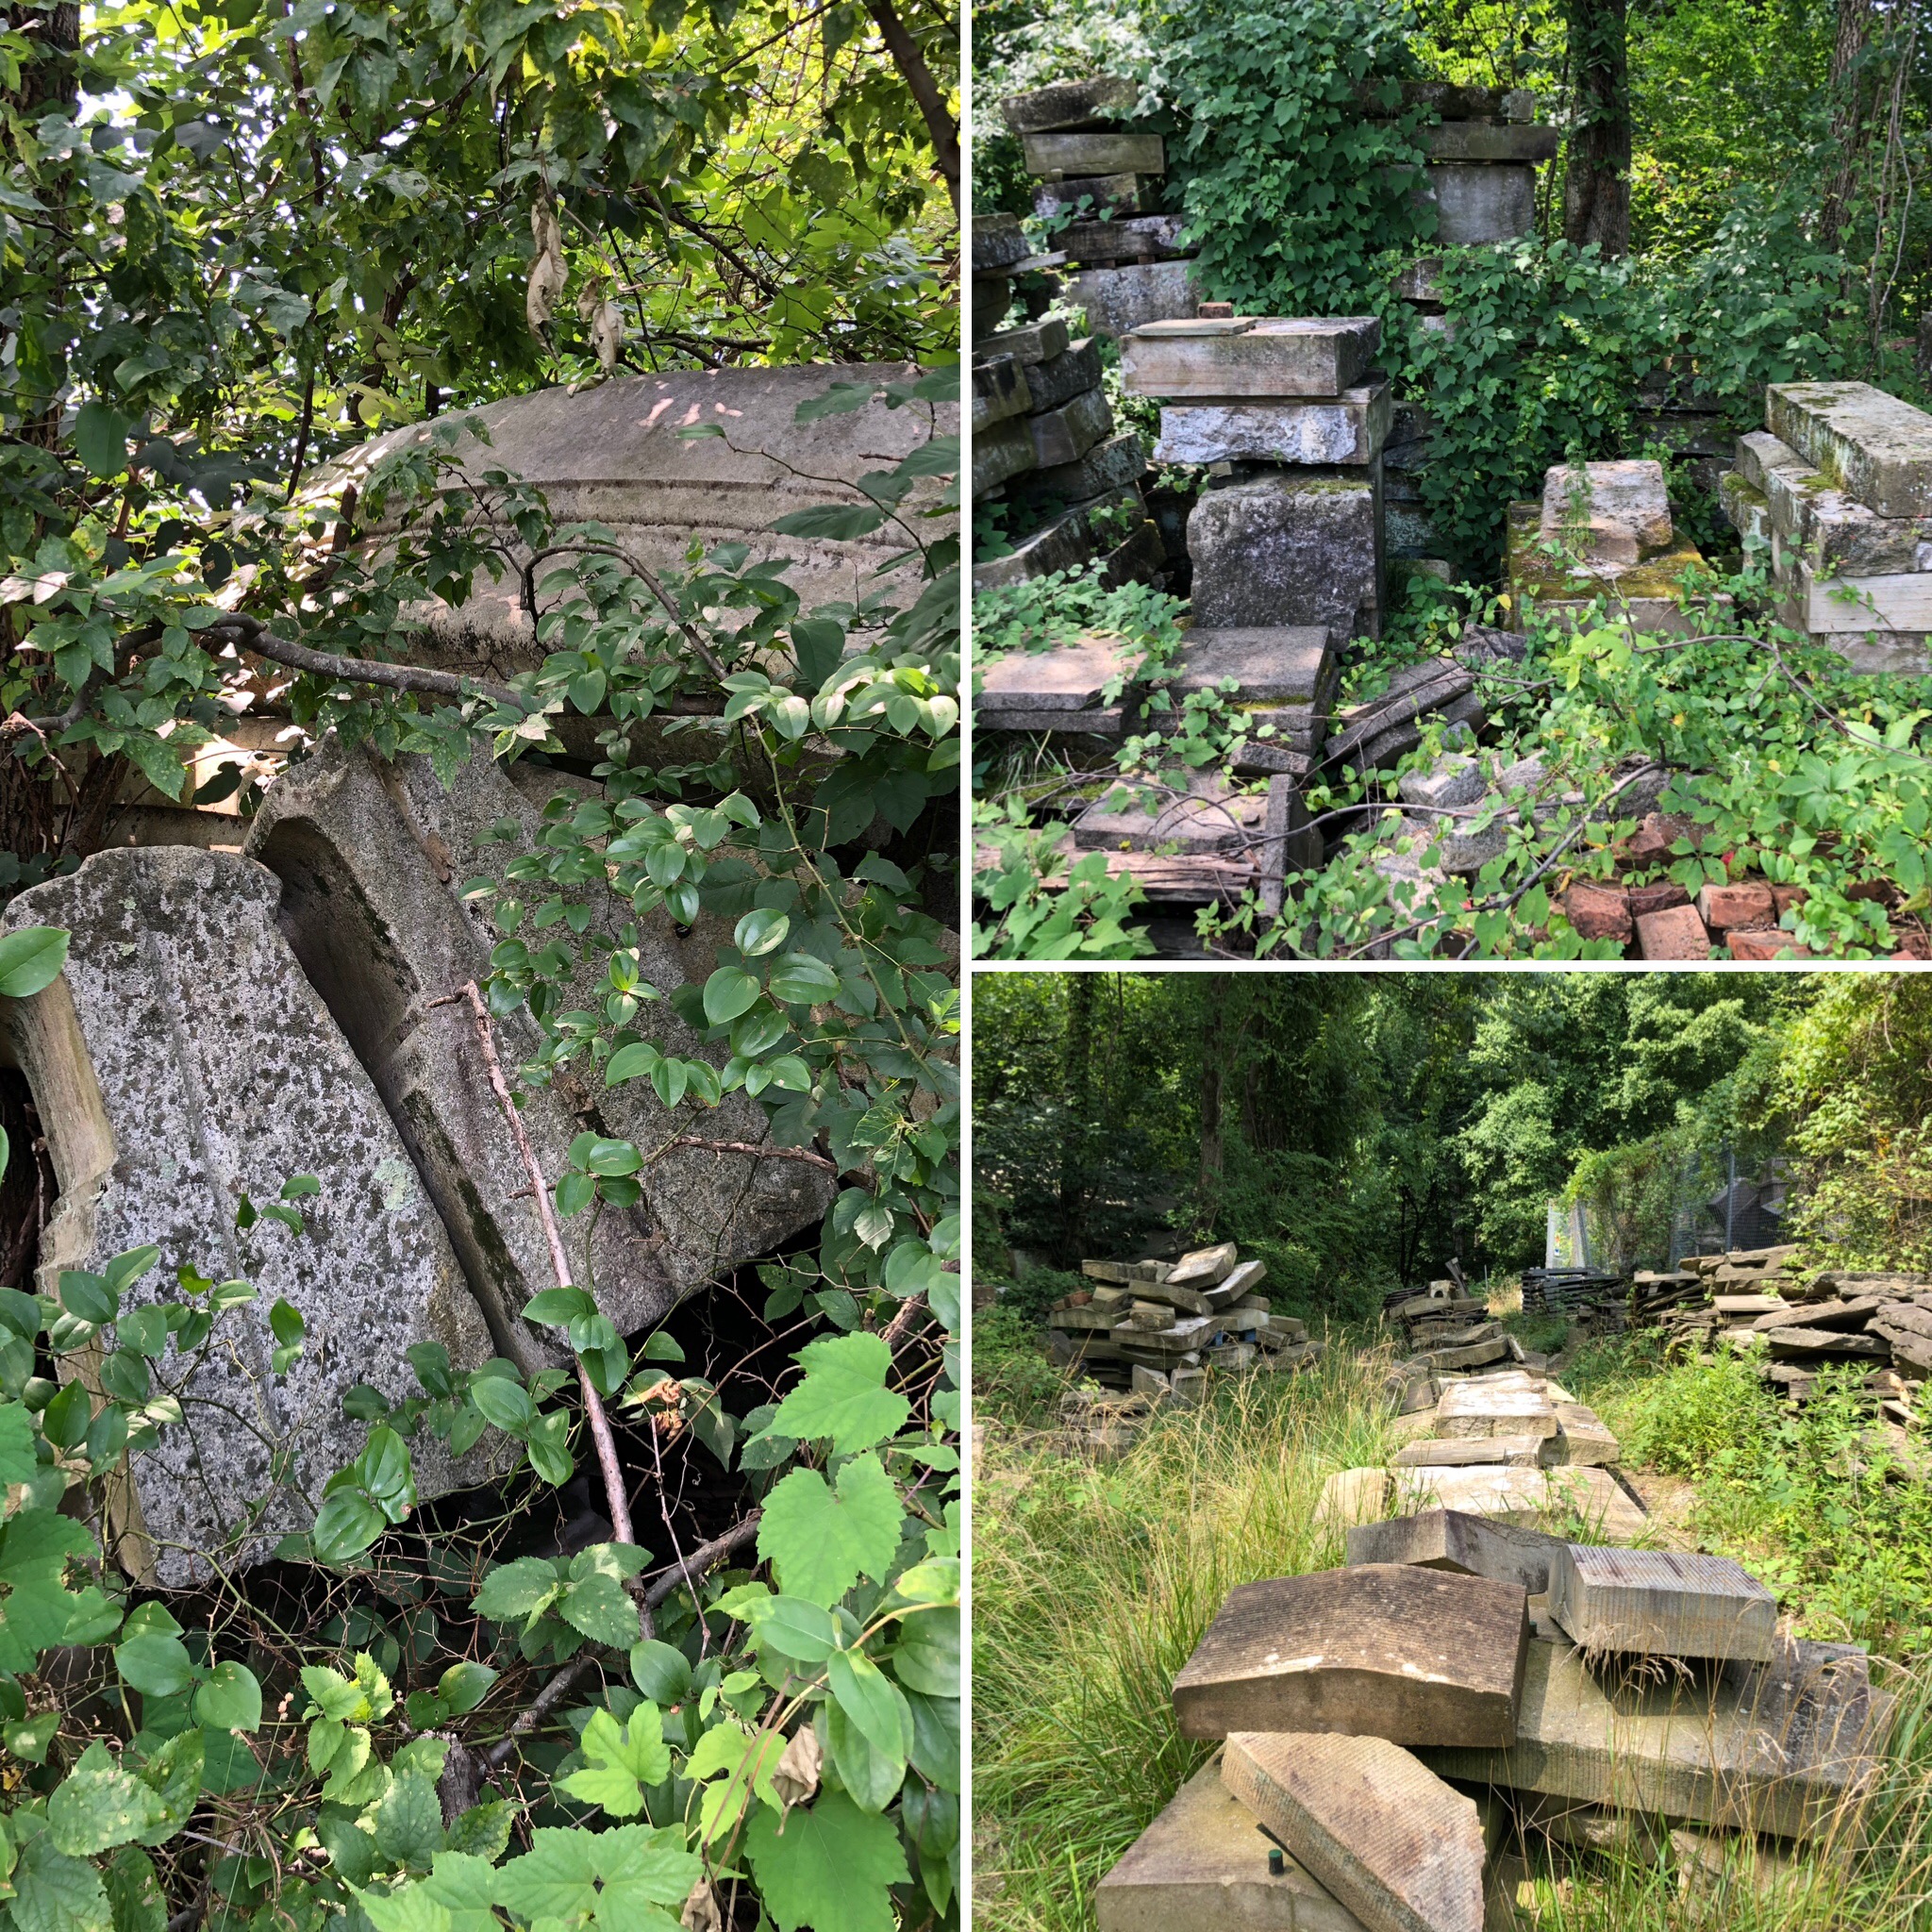 Capitol Stones in DC's Rock Creek Park removed from government buildings in the 1950s to this wet shaded spot where they are cleaner than buildings across the city repeatedly cleaned since.